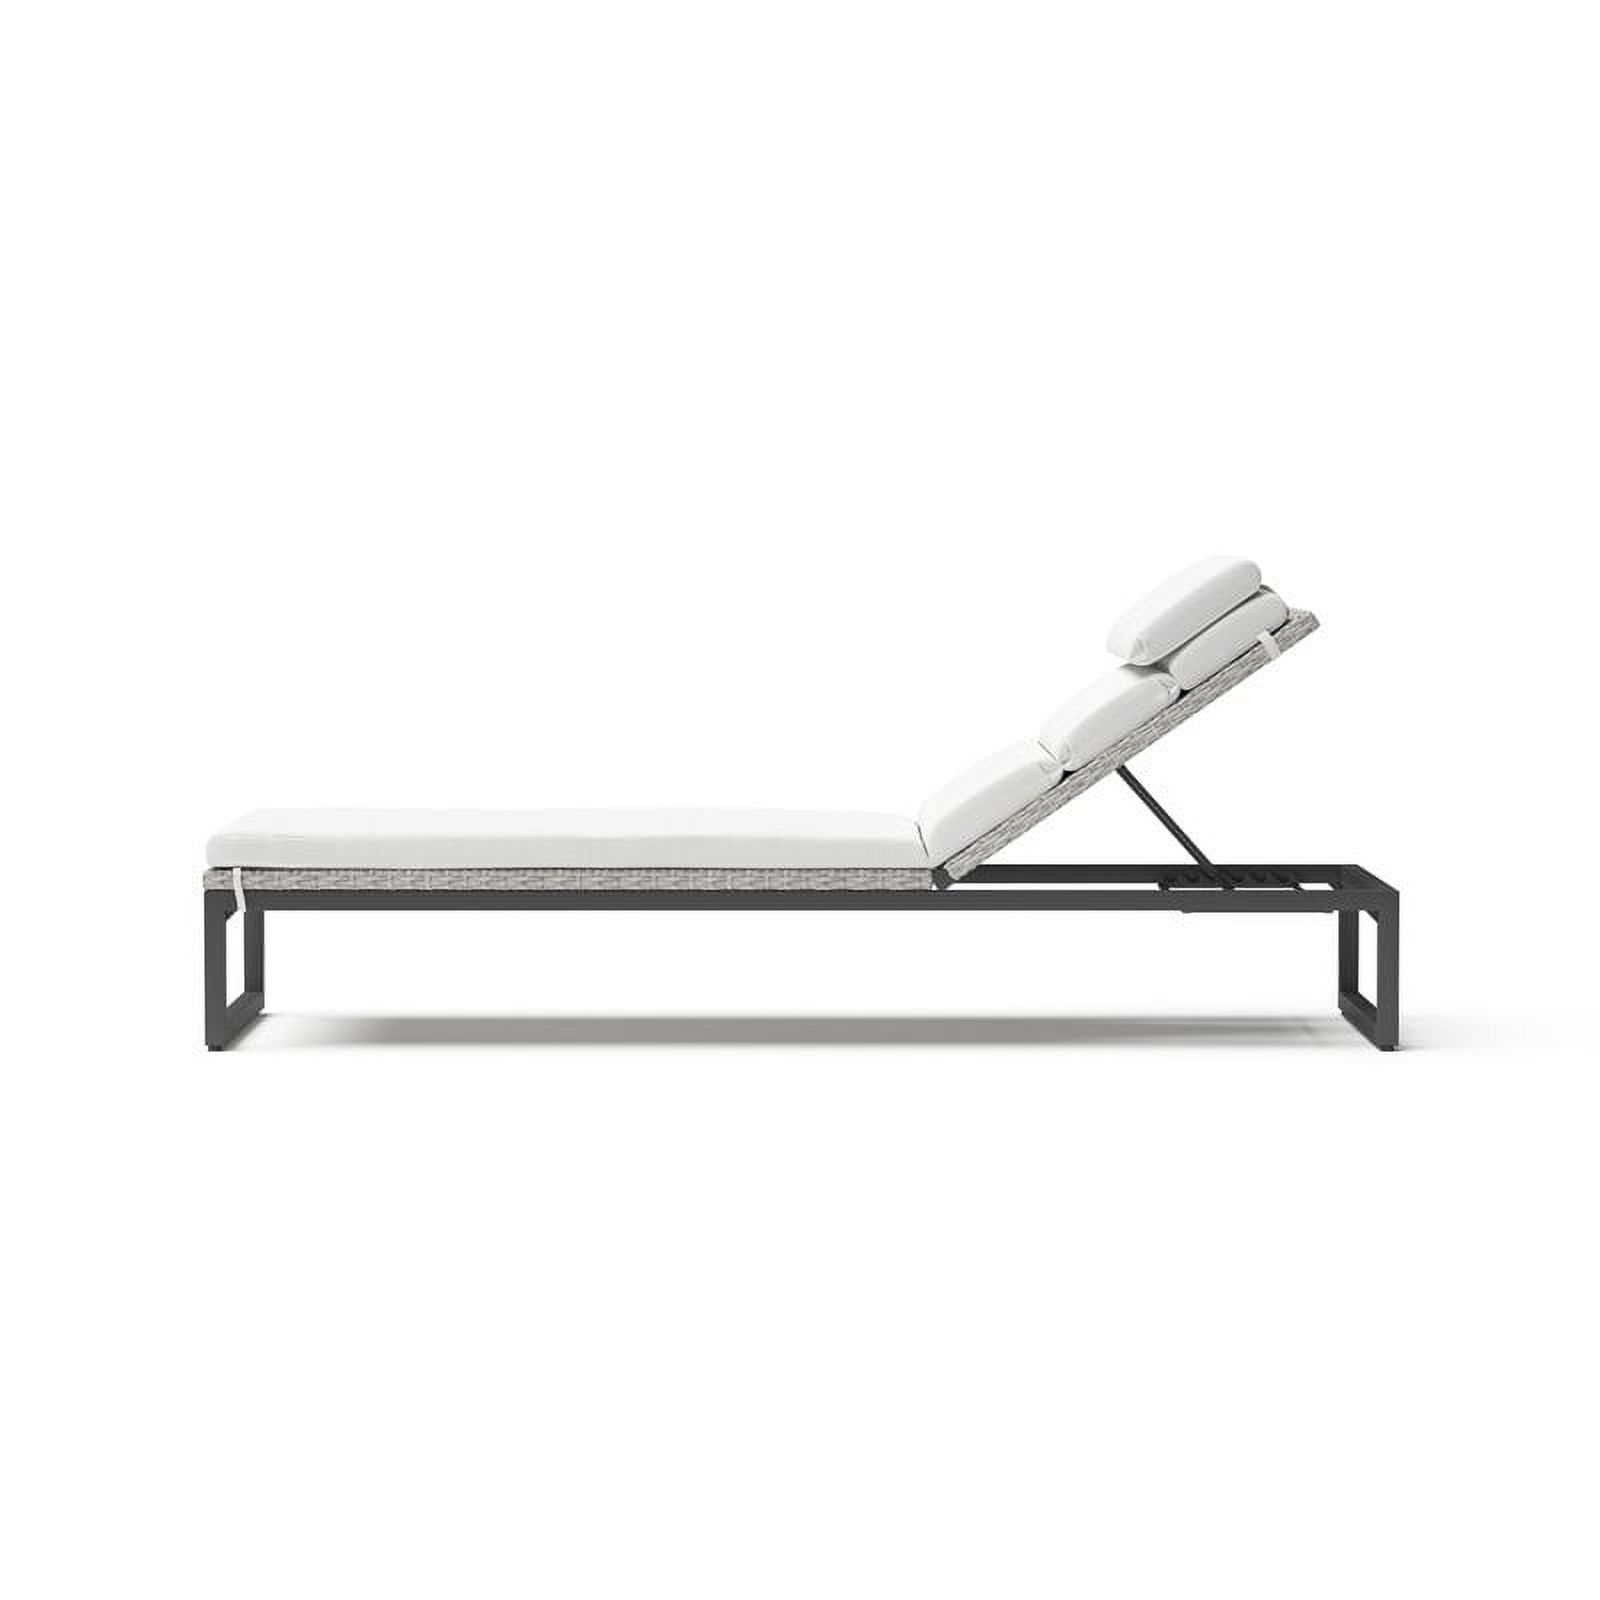 RST Brands Milo Chaise Lounges w/ Cushions in White/Gray (Set of 2) - image 5 of 6